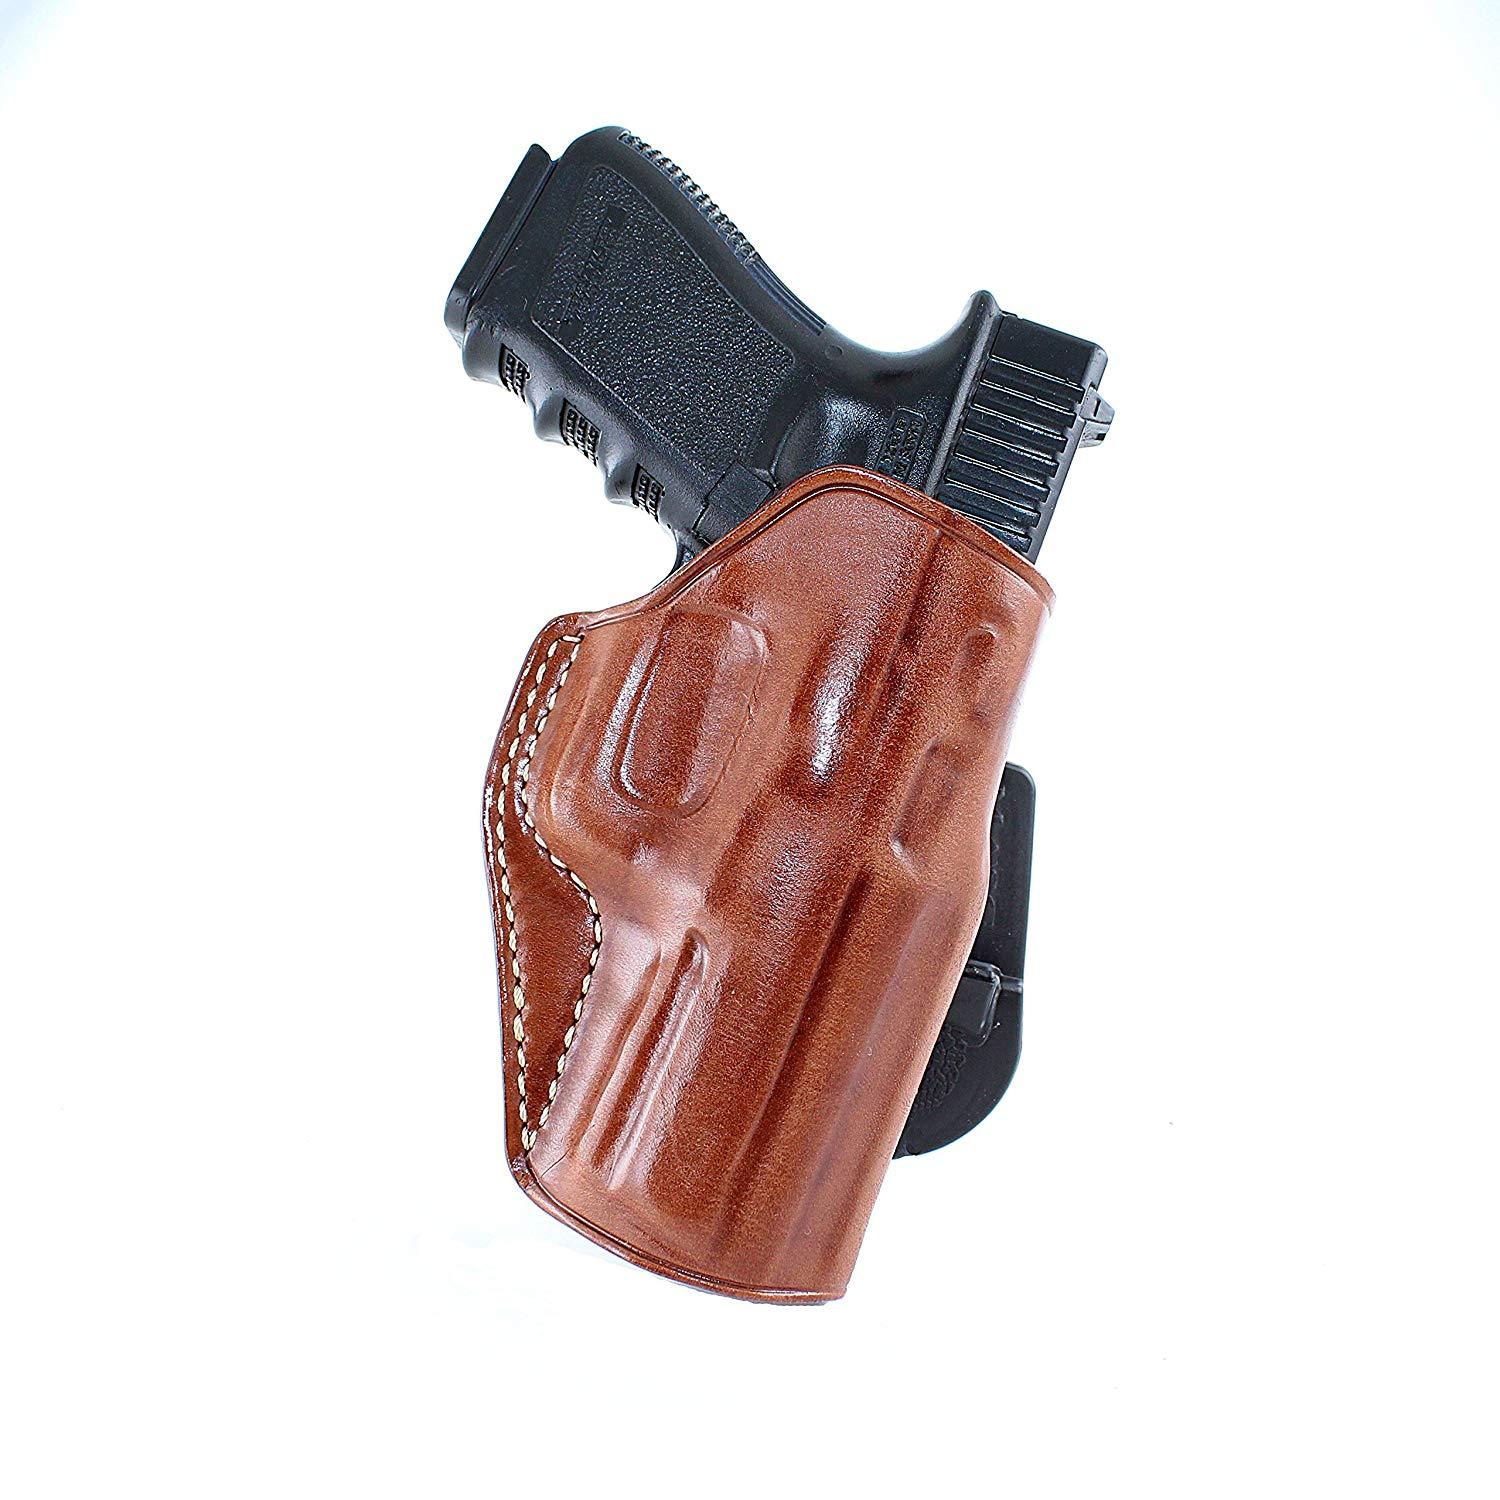 MASC LEATHER PADDLE HOLSTER (OWB) WITH OPEN TOP FOR DIAMONDBACK DB9 9mm 3''BBL - $59.99